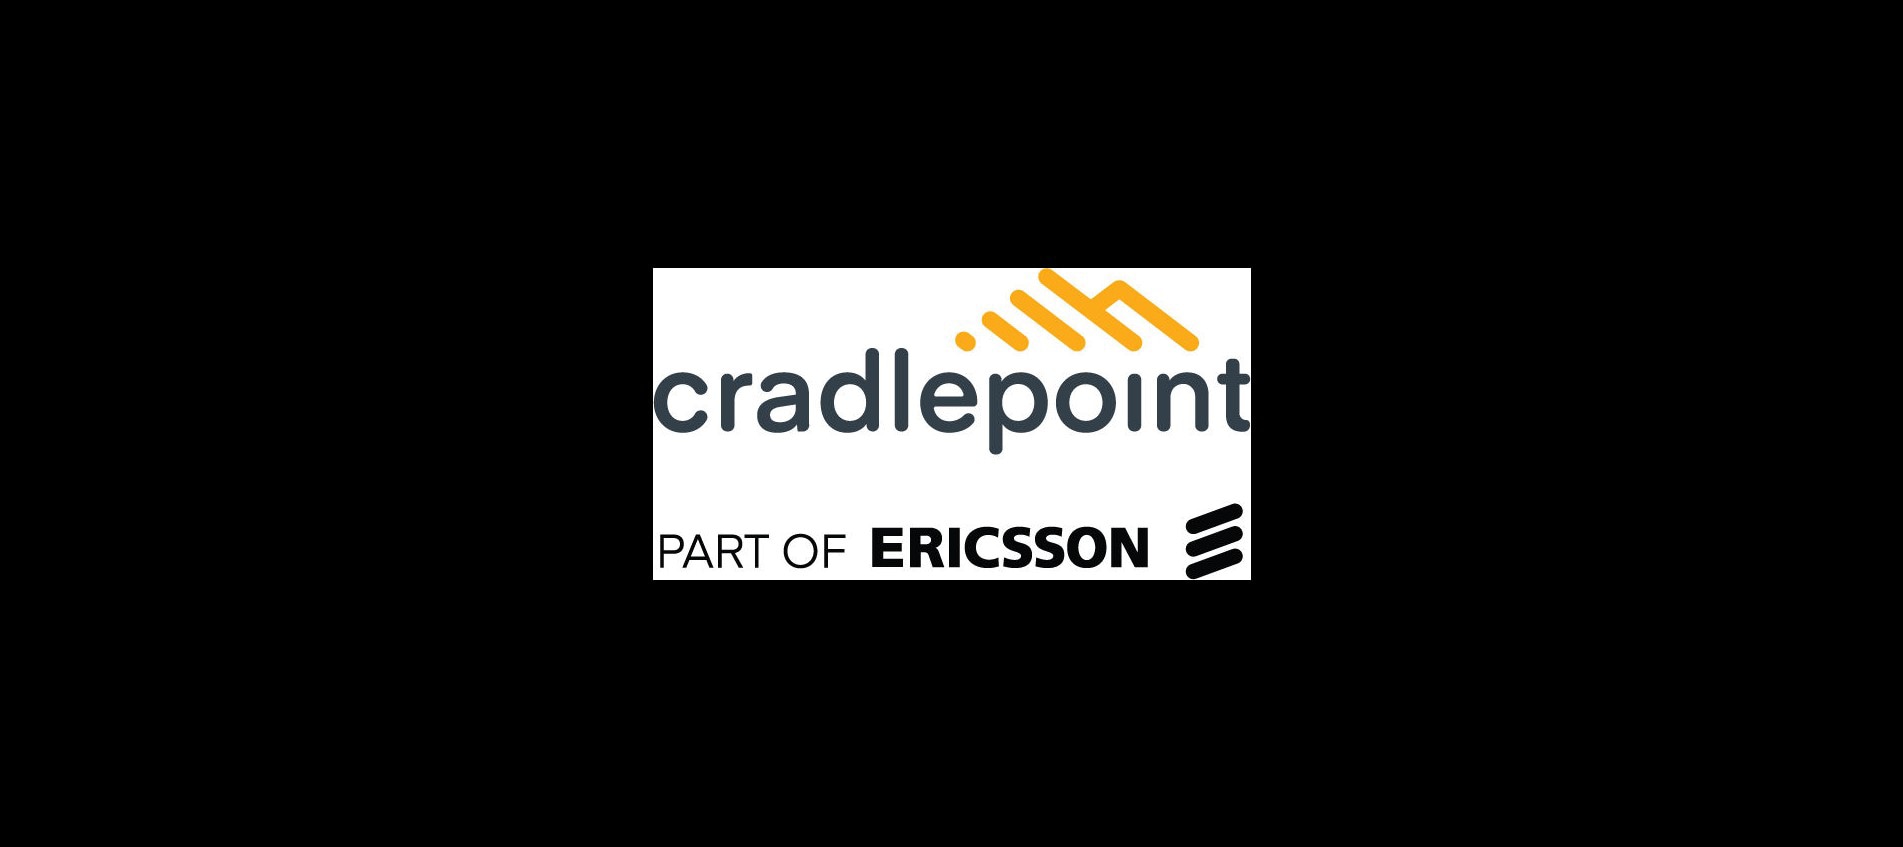 Cradlepoint SIM Management with Private Network Plan